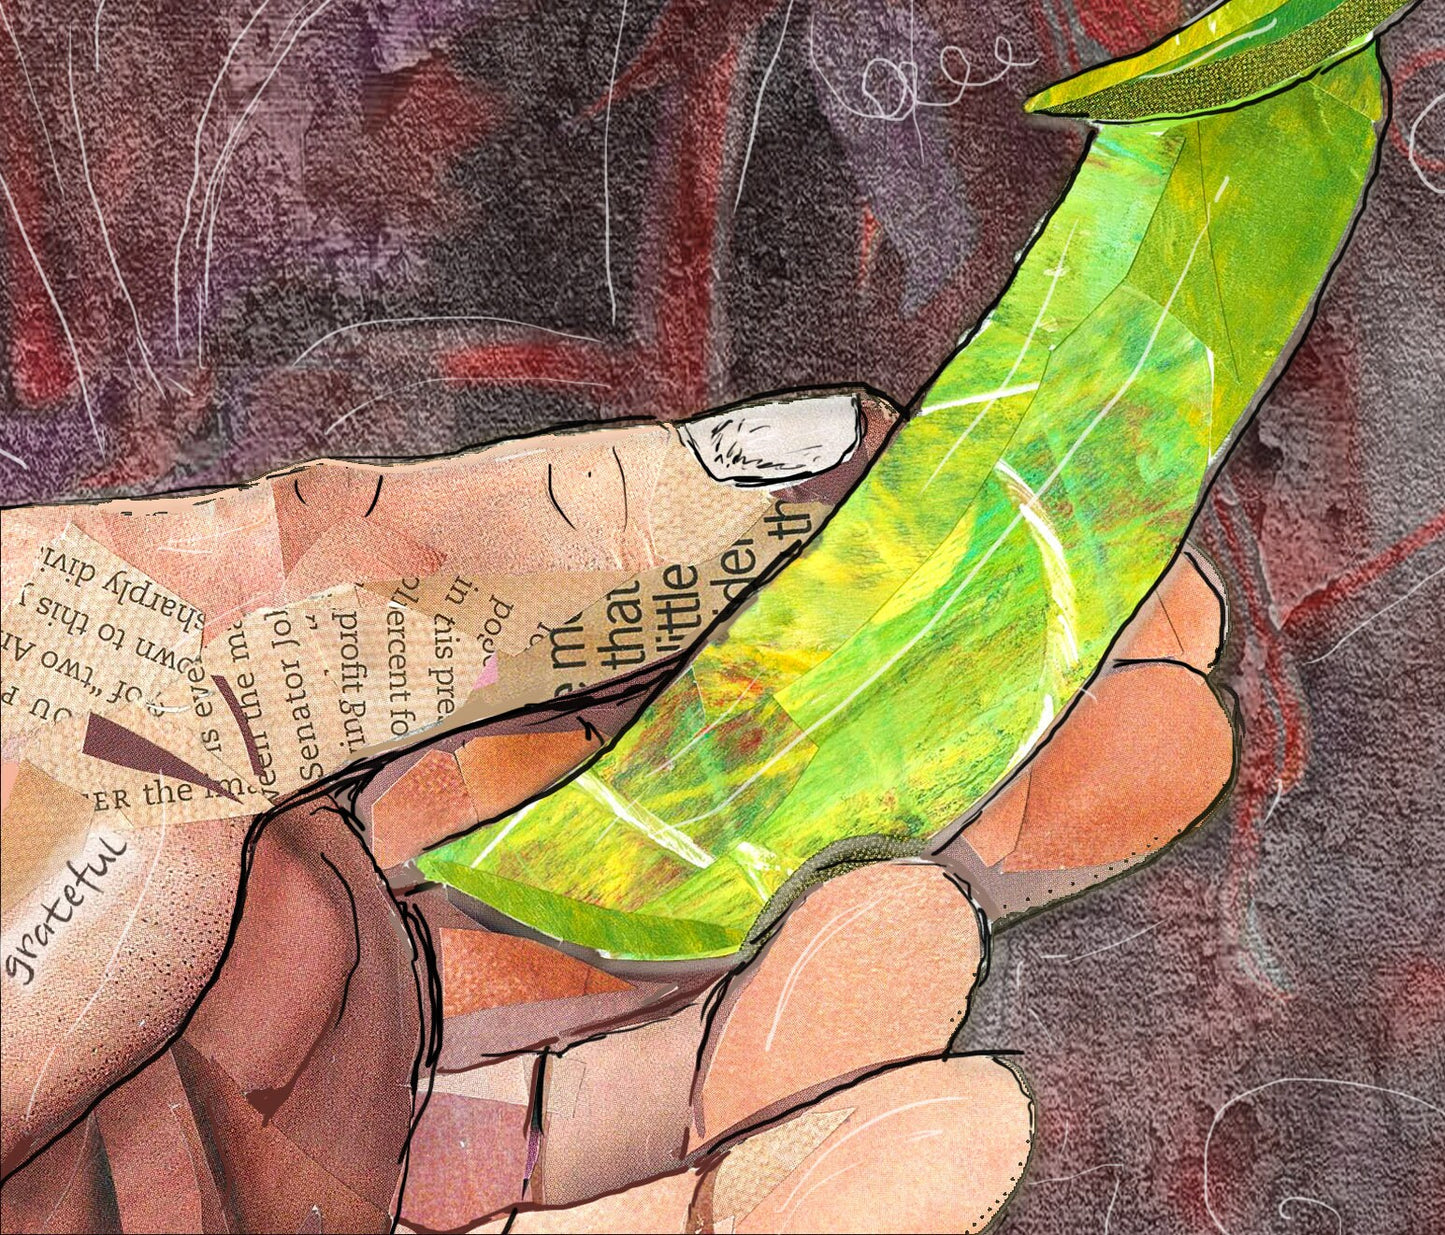 8x10 Art Print of a mixed media collage of hands picking snap peas, garden, farming